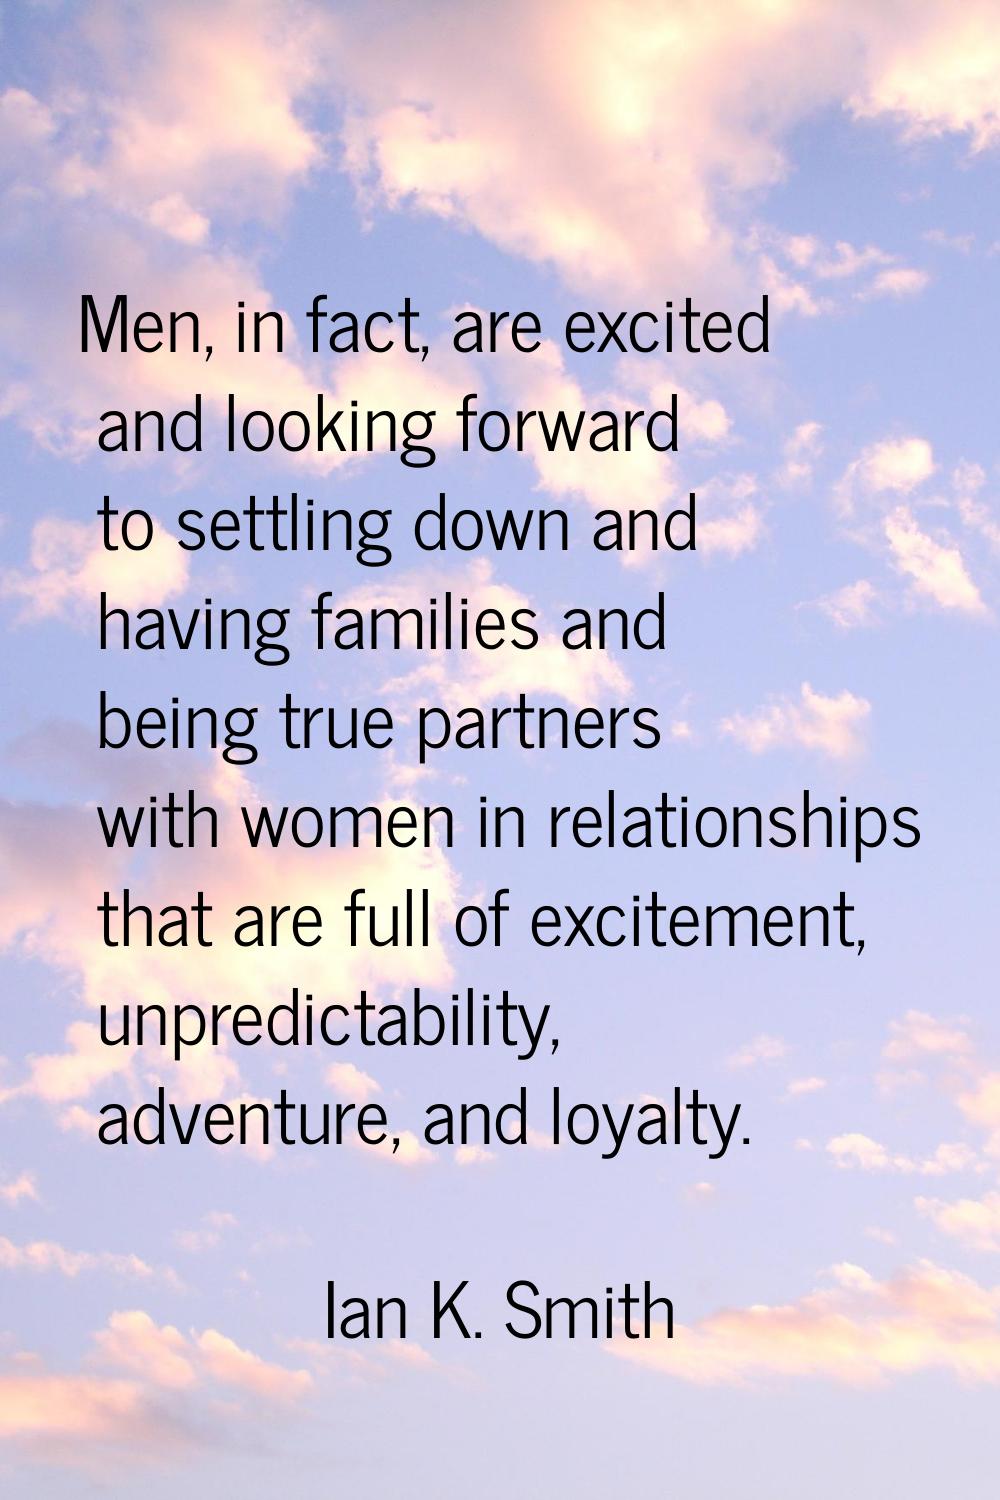 Men, in fact, are excited and looking forward to settling down and having families and being true p